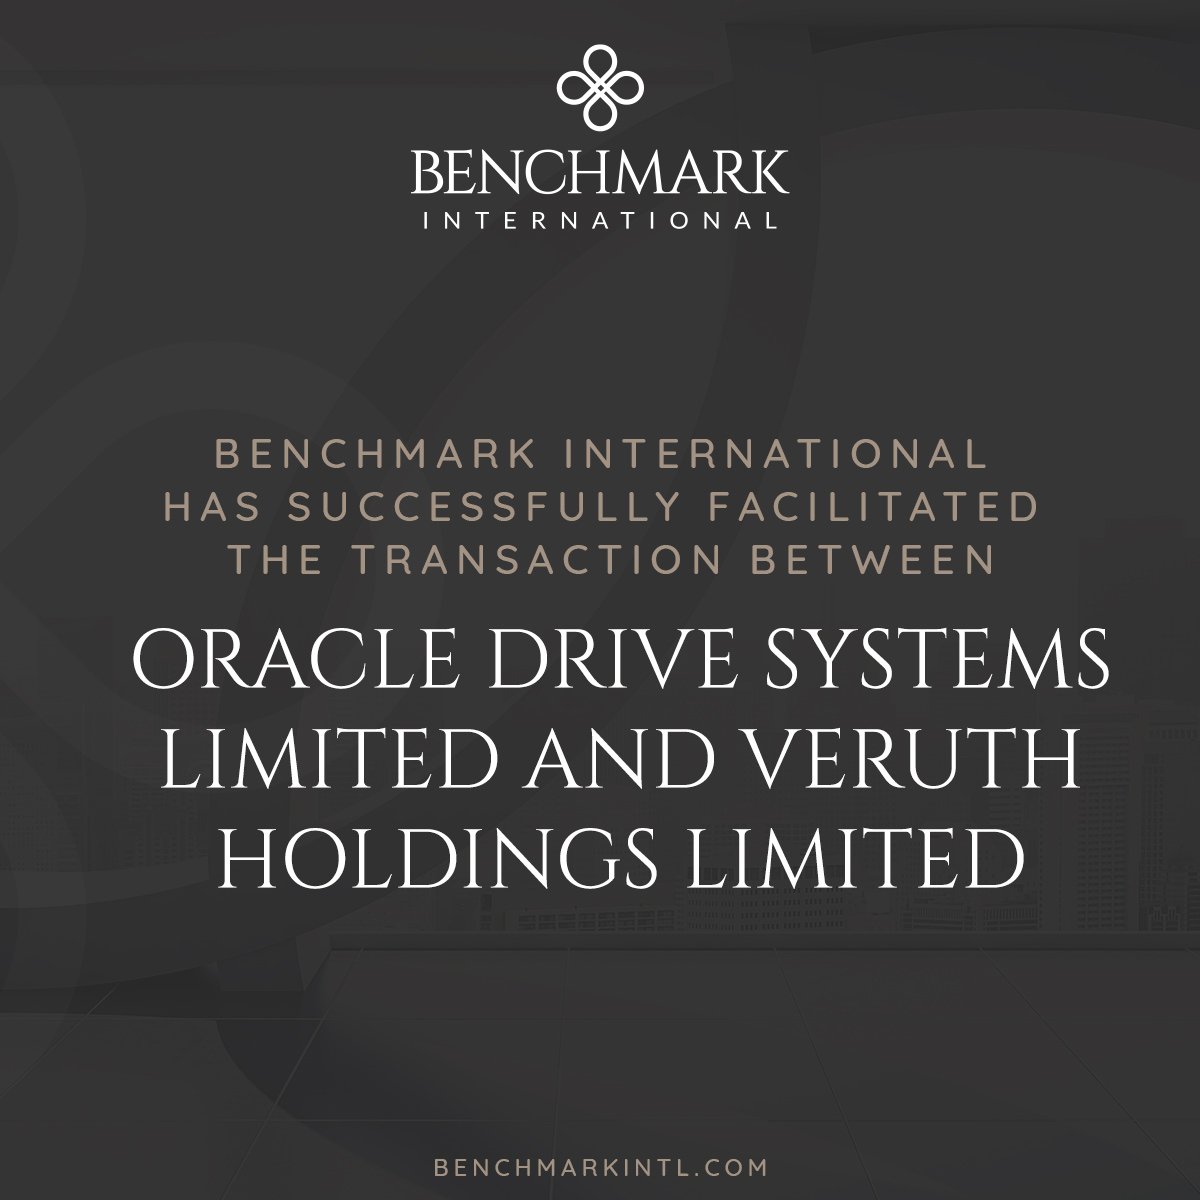 Veruth acquires Oracle Drive Systems 